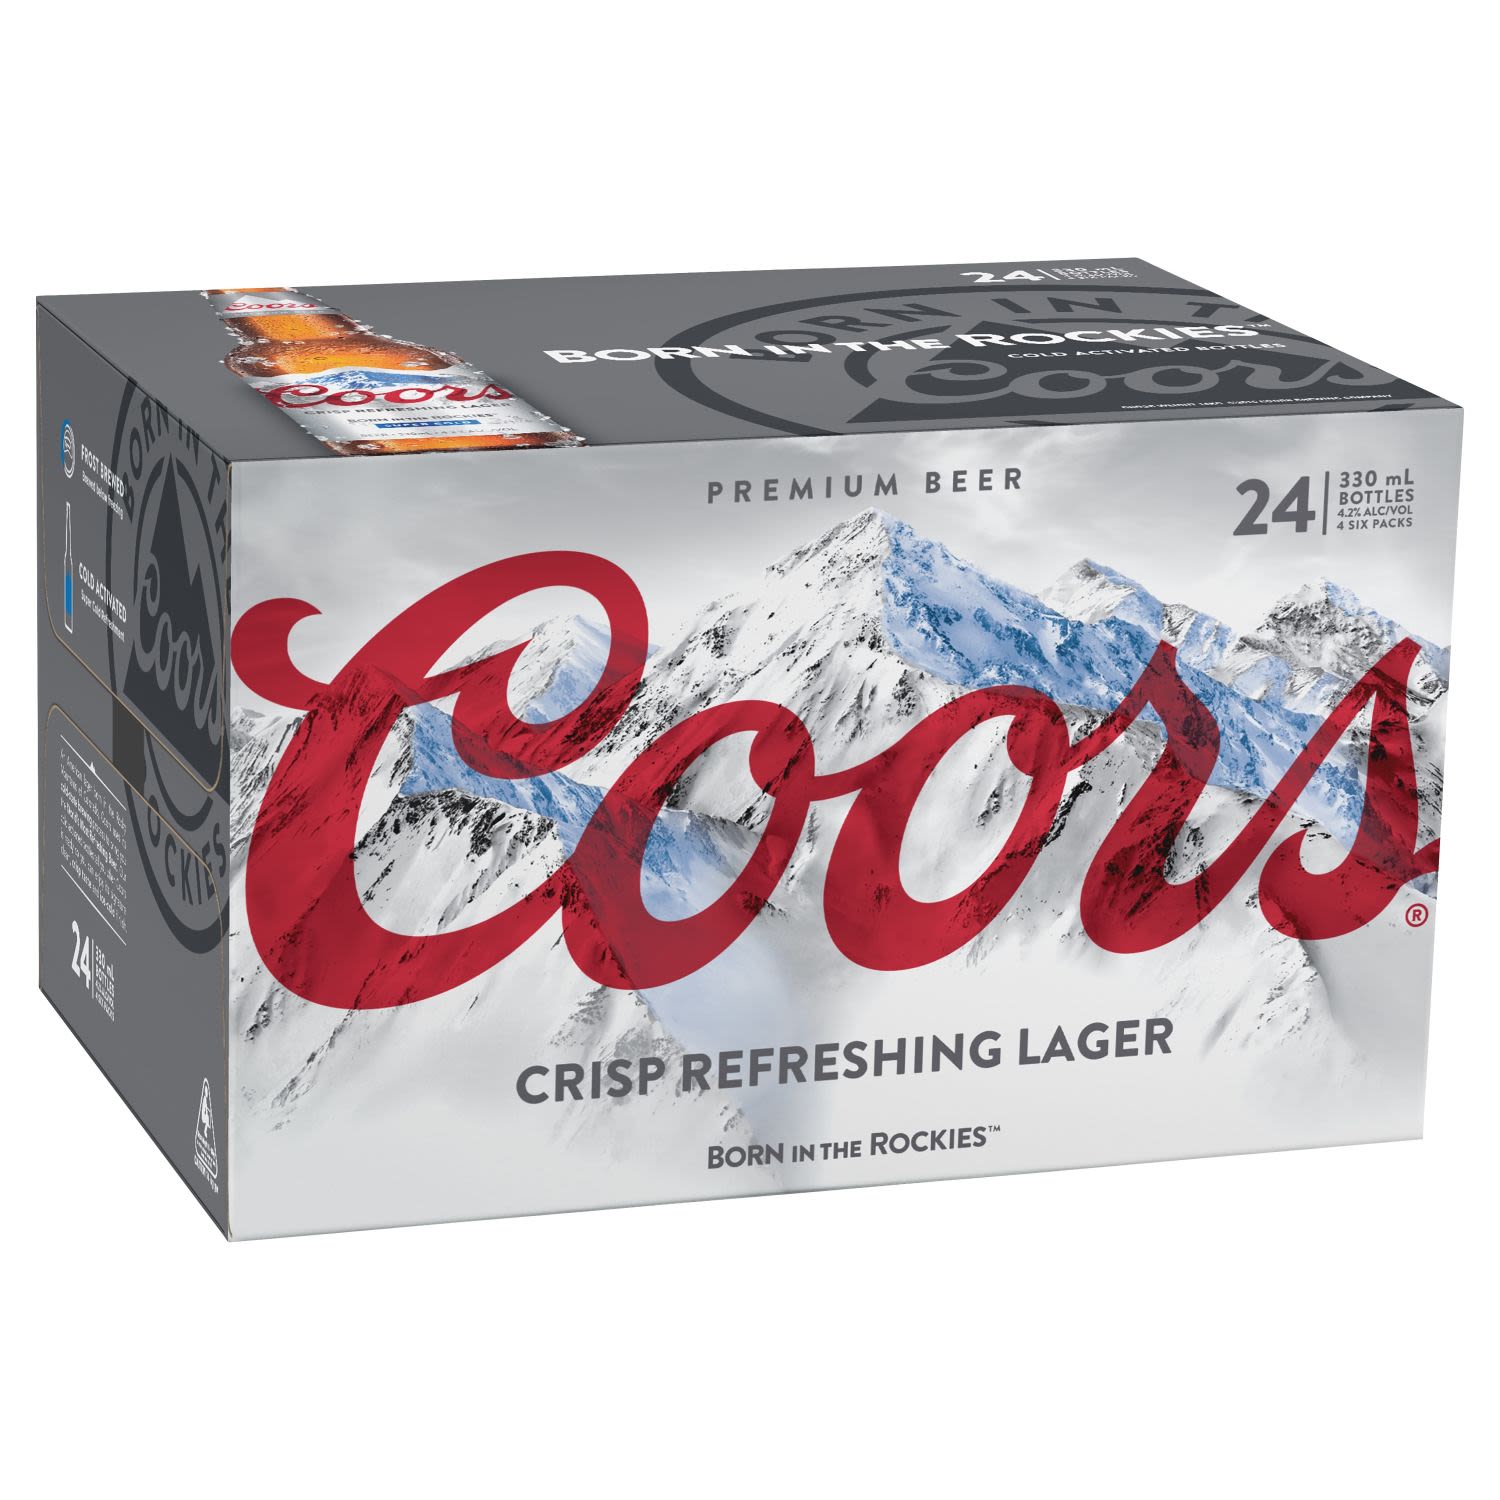 Coors was first developed in 1873 in the American Rocky Mountains. Coors is bottled at the peak of freshness, so that every Coors beer starts cold and refreshing, and ends the same smooth way.<br /> <br />Alcohol Volume: 4.20%<br /><br />Pack Format: 24 Pack<br /><br />Standard Drinks: 1.1</br /><br />Pack Type: Bottle<br /><br />Country of Origin: USA<br />